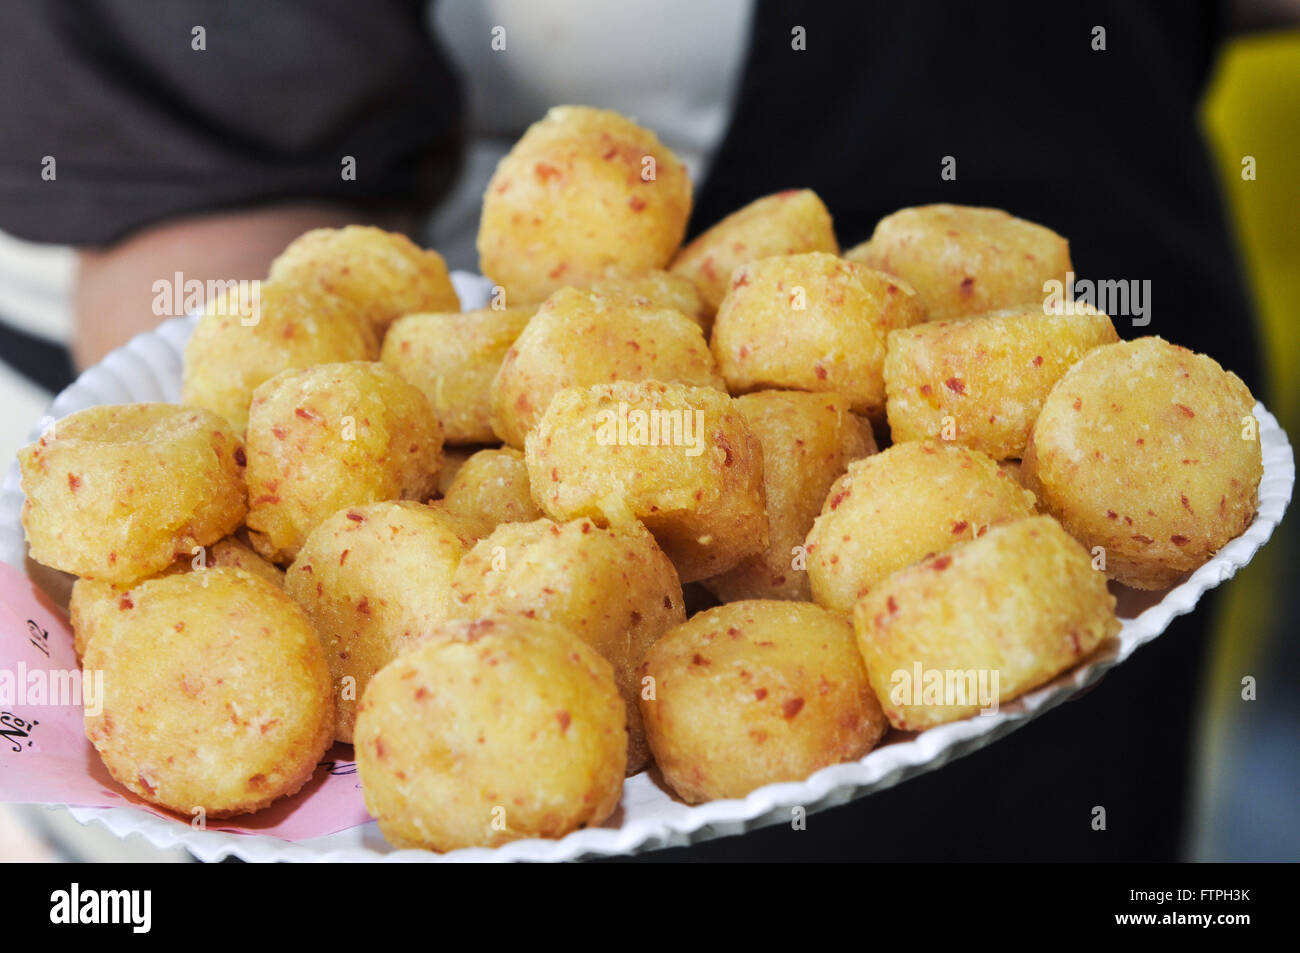 Cassava dumplings stuffed with smoked sausage sold on First Party Cassava Stock Photo